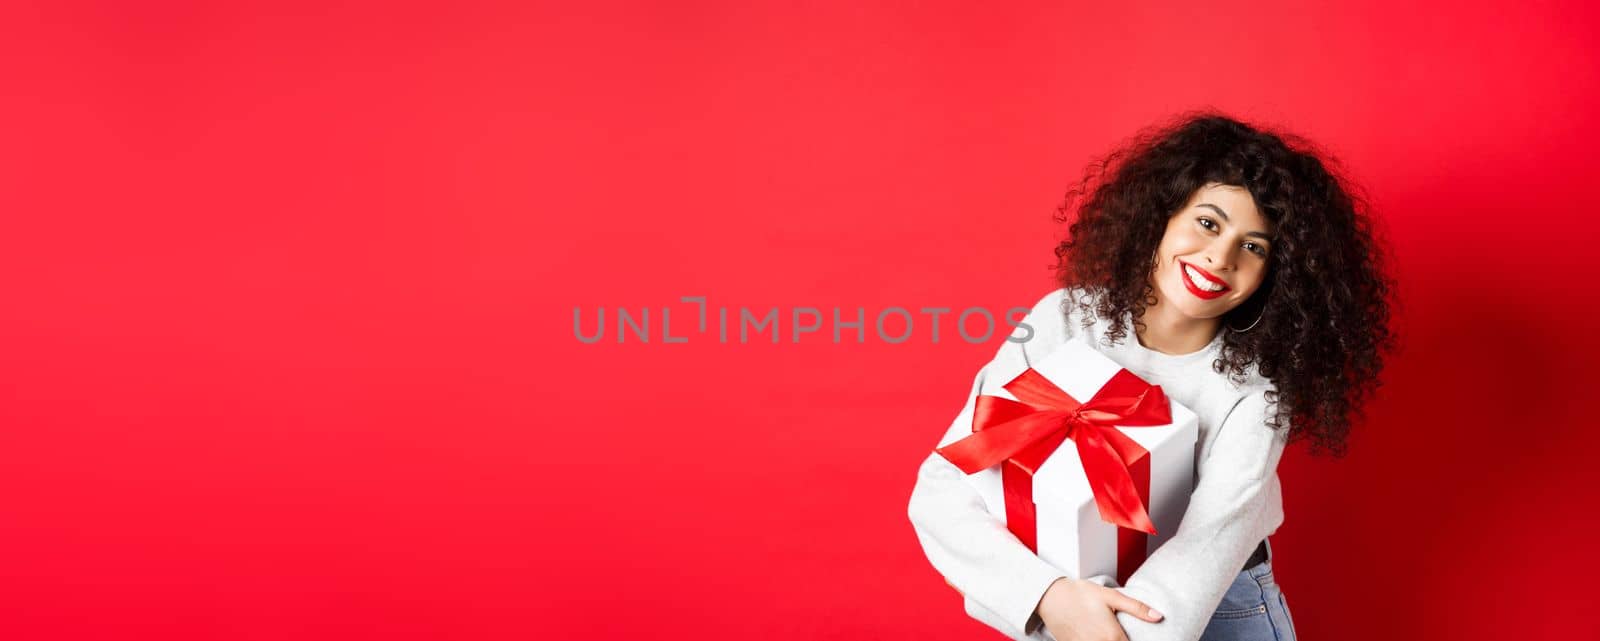 Celebration and holidays concept. Happy woman holding birthday gift and smiling at camera, standing in casual clothes, red background.